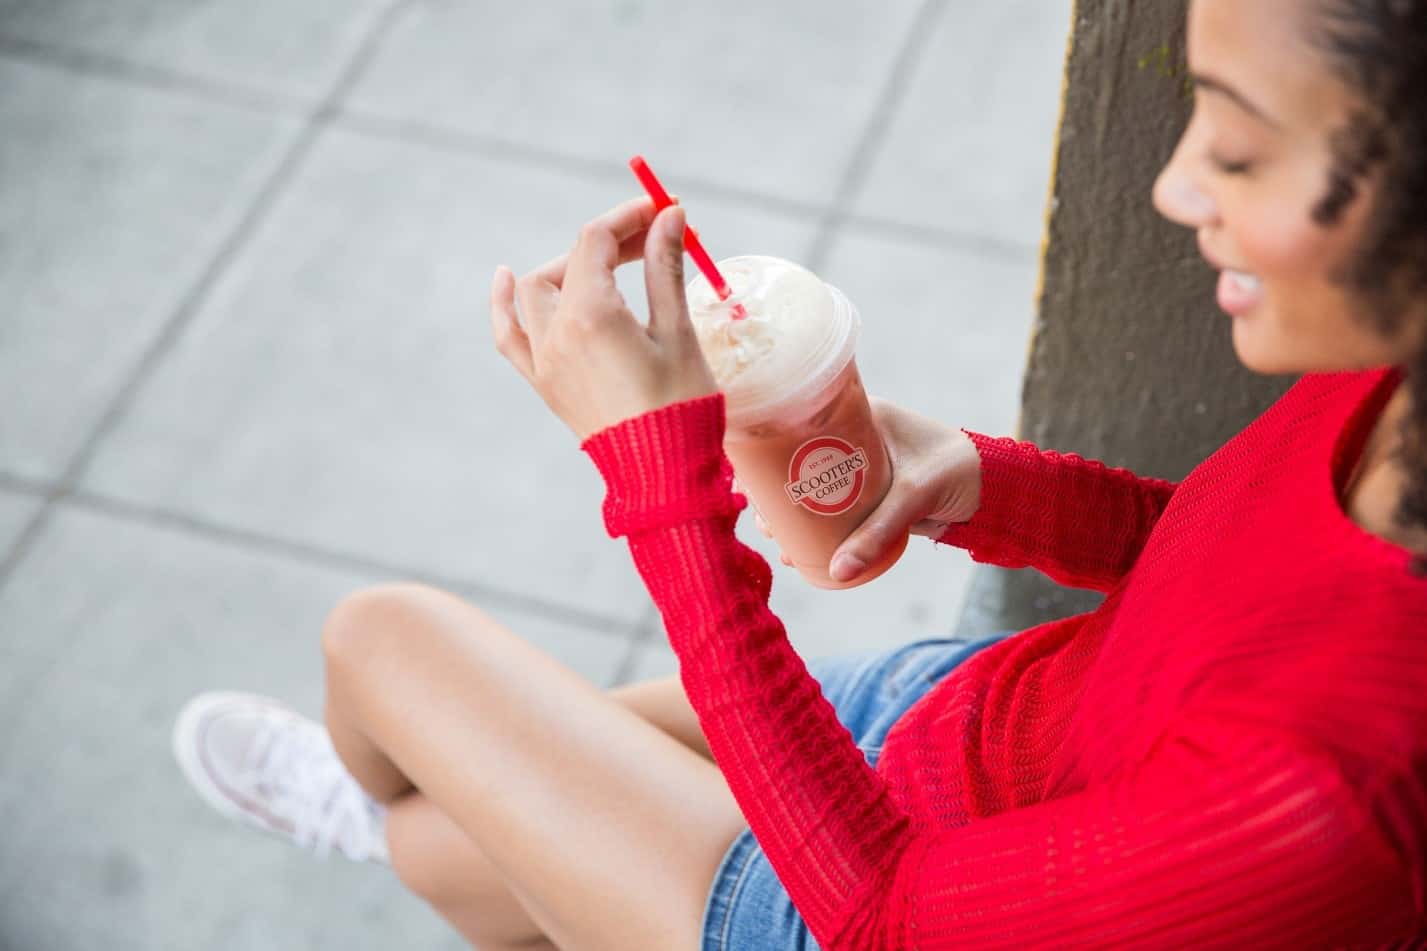 African-American girl in a red sweater enjoying a smoothie from Scooter's Coffee.